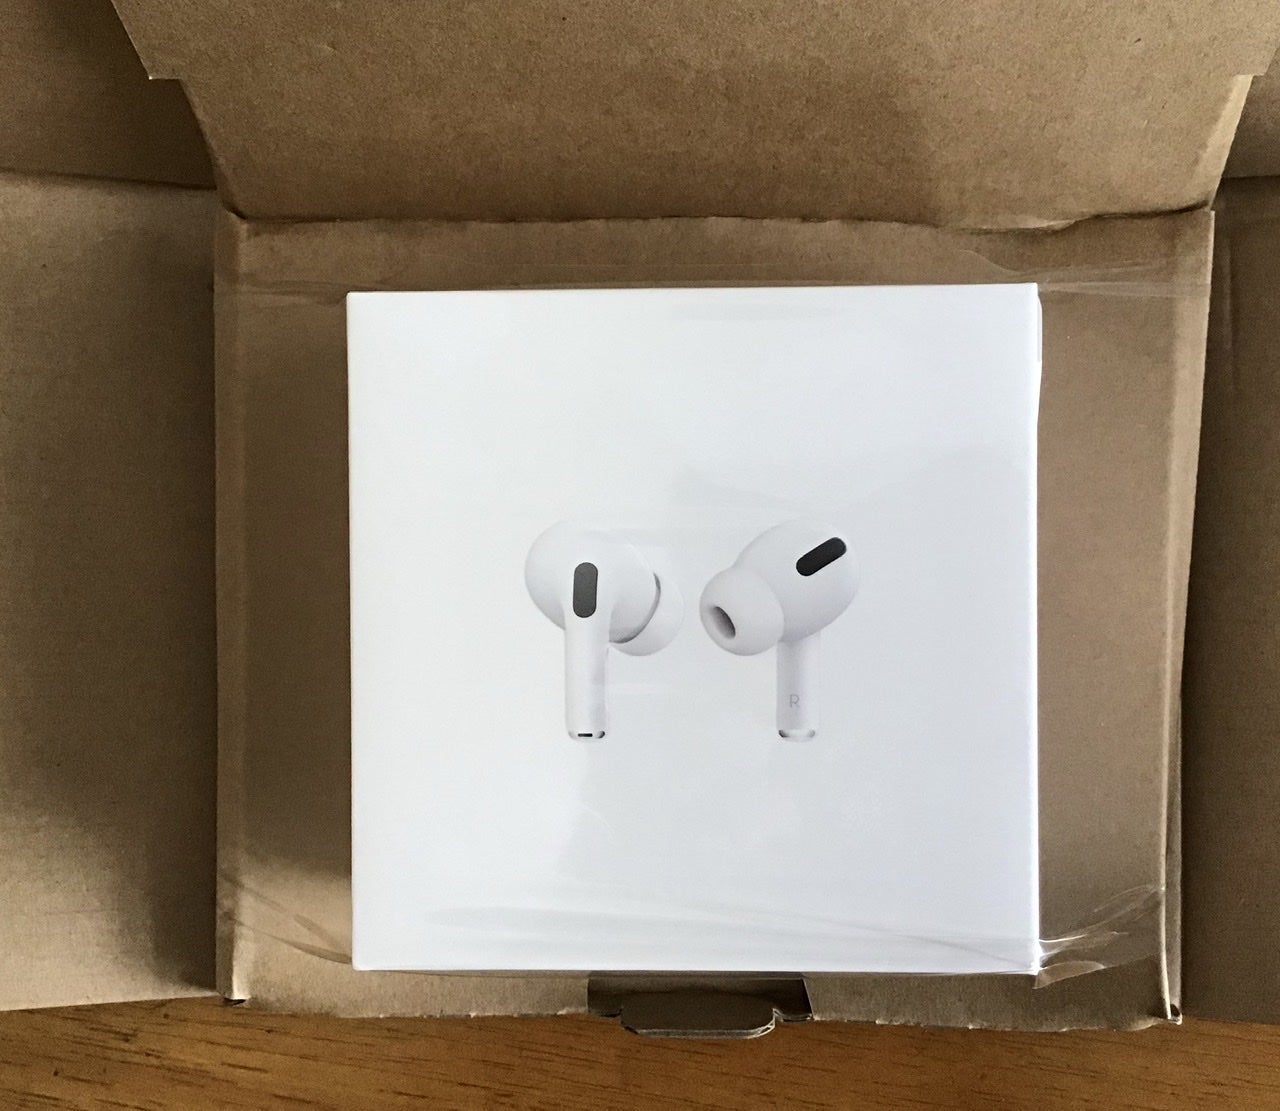 AirPods proがキターー | 4U(For You)